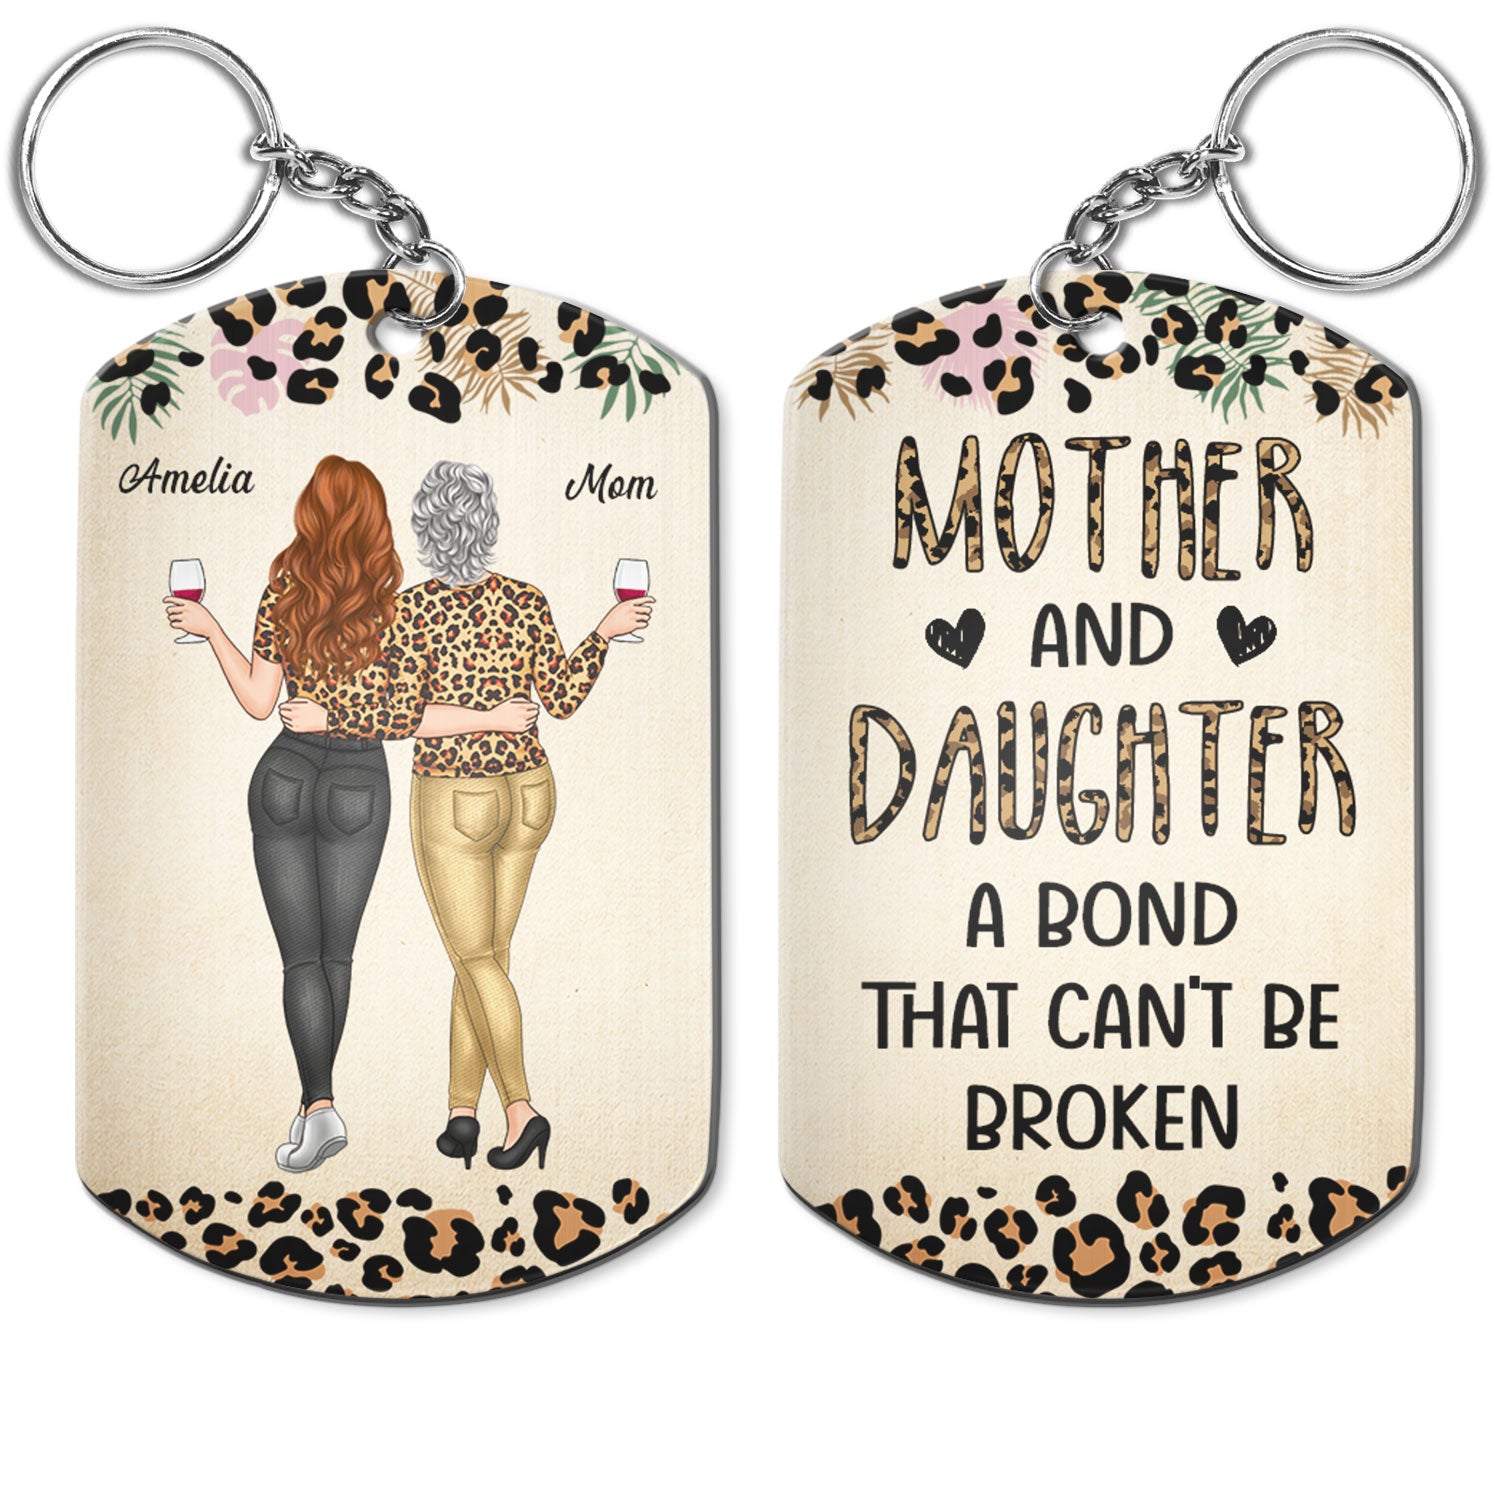 Mother & Daughter A Bond That Can't Be Broken - Gift For Mom, Mother, Grandma - Personalized Aluminum Keychain